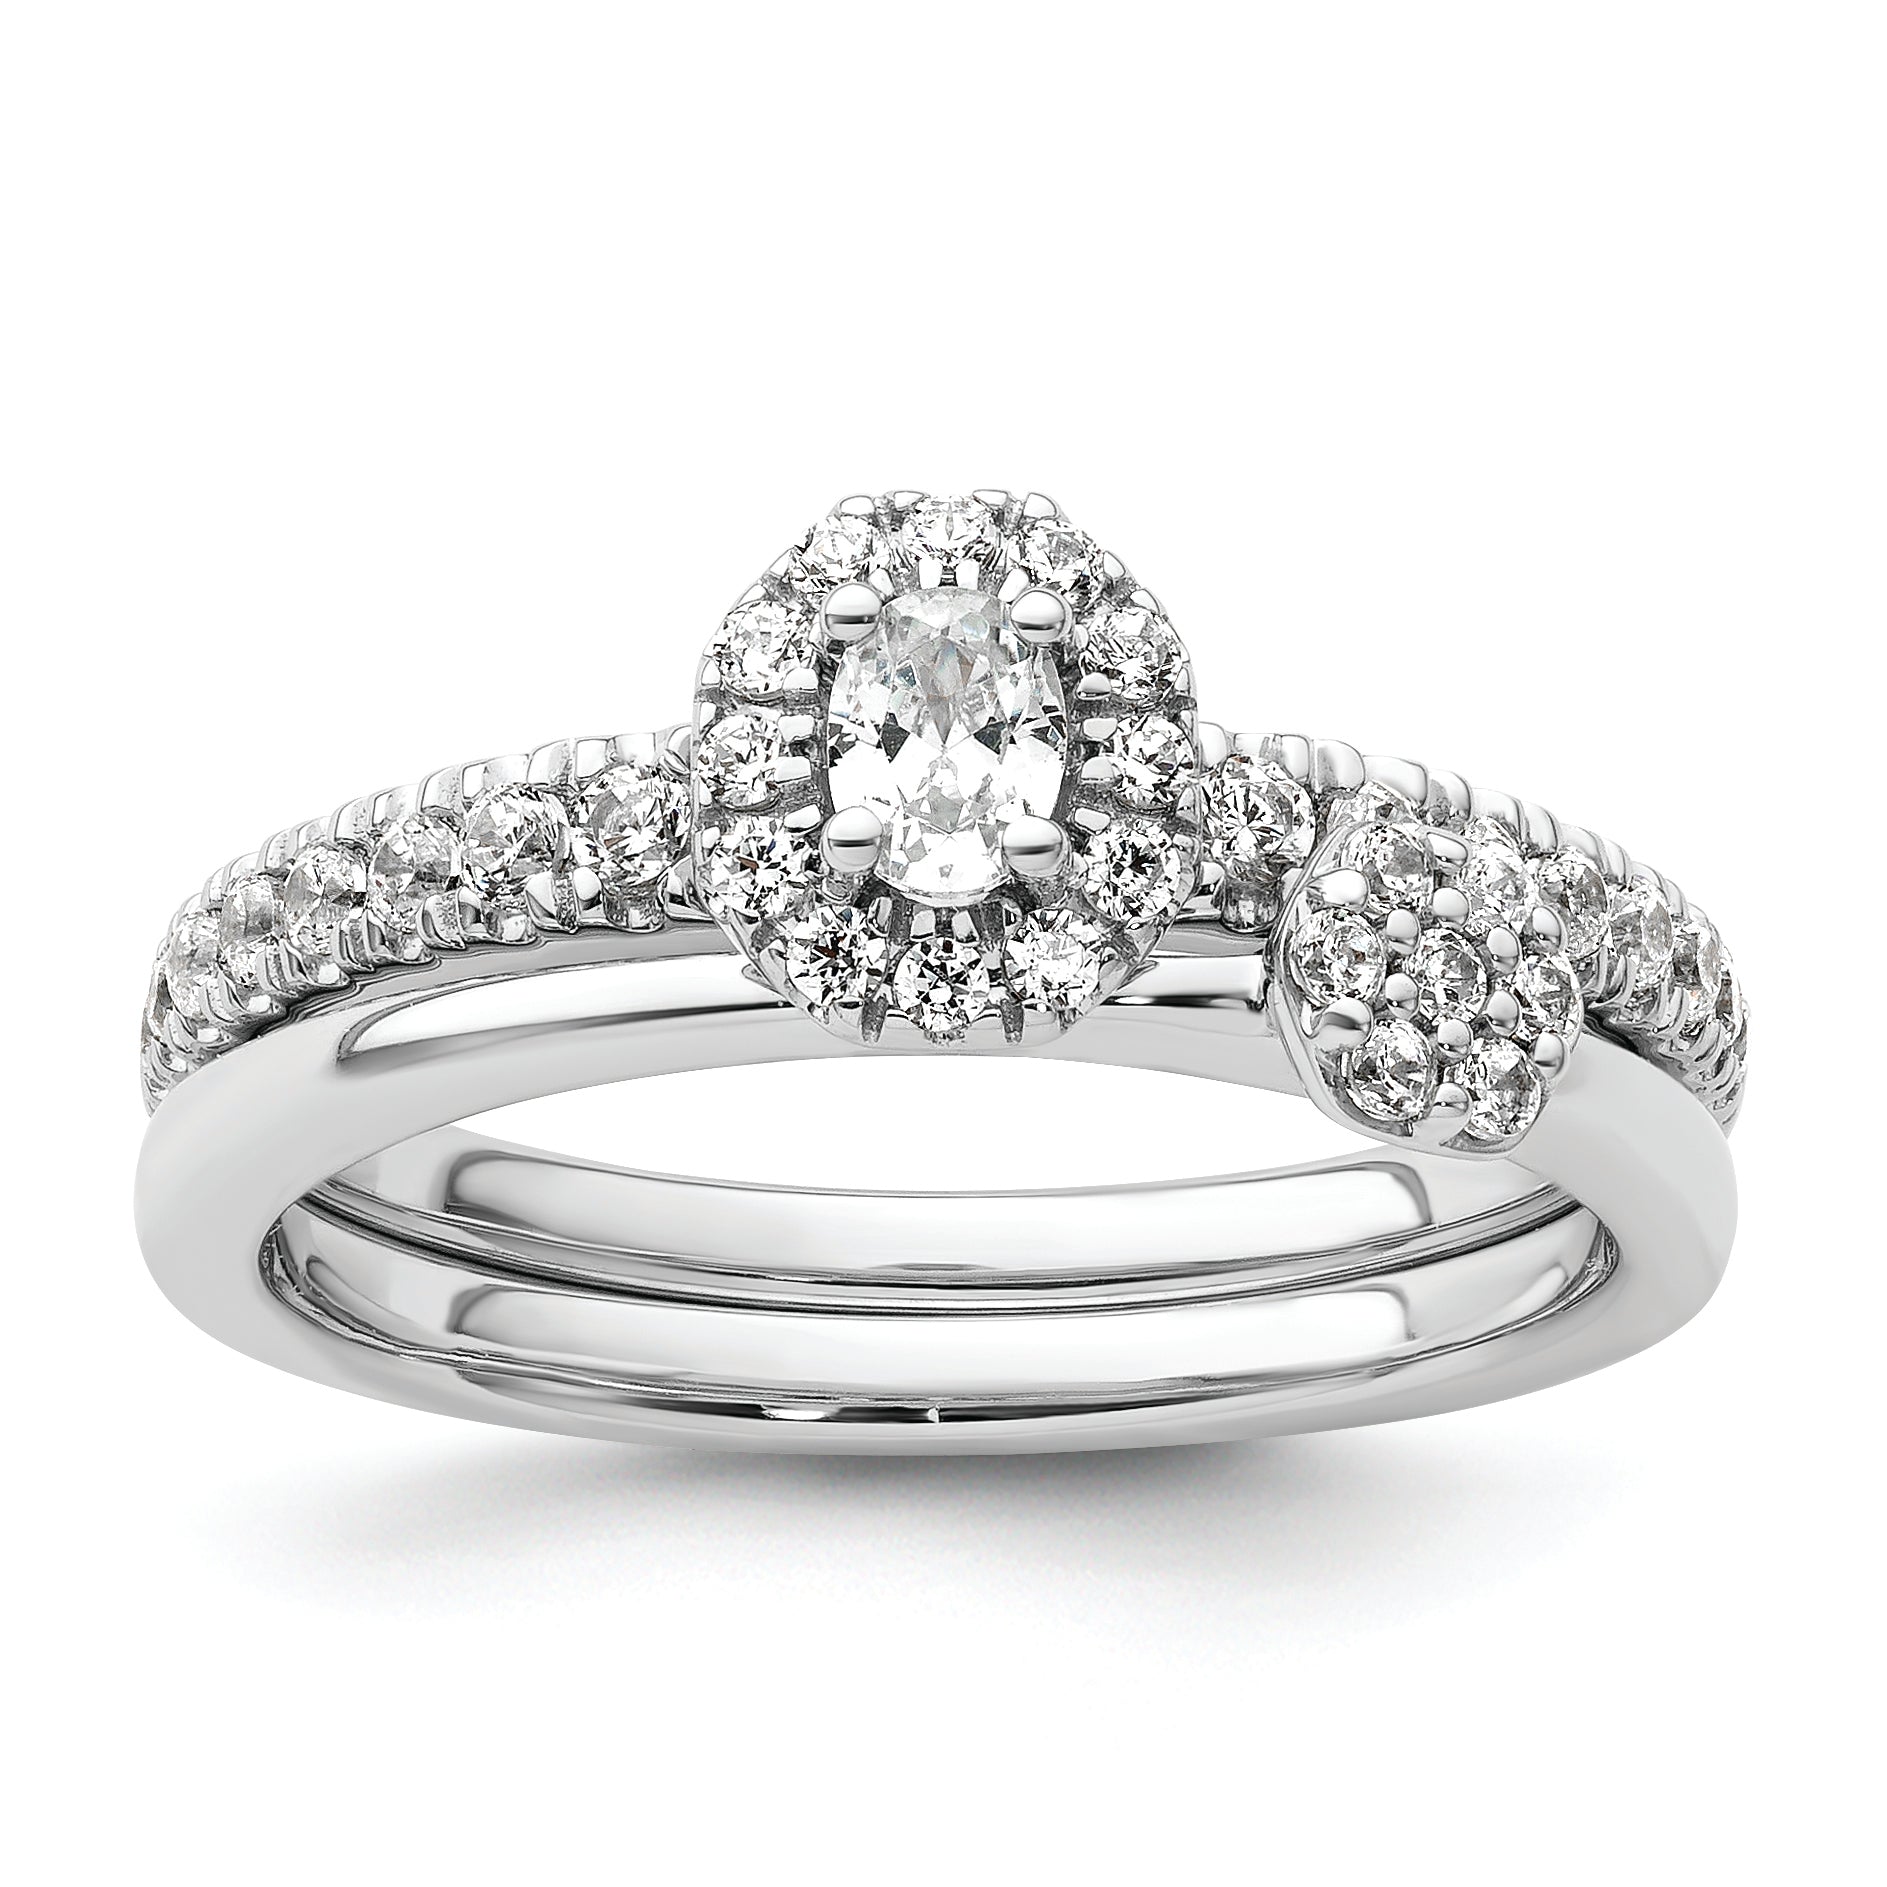 Two Promises 14k White Gold Diamond Oval Halo Complete Engagement Ring